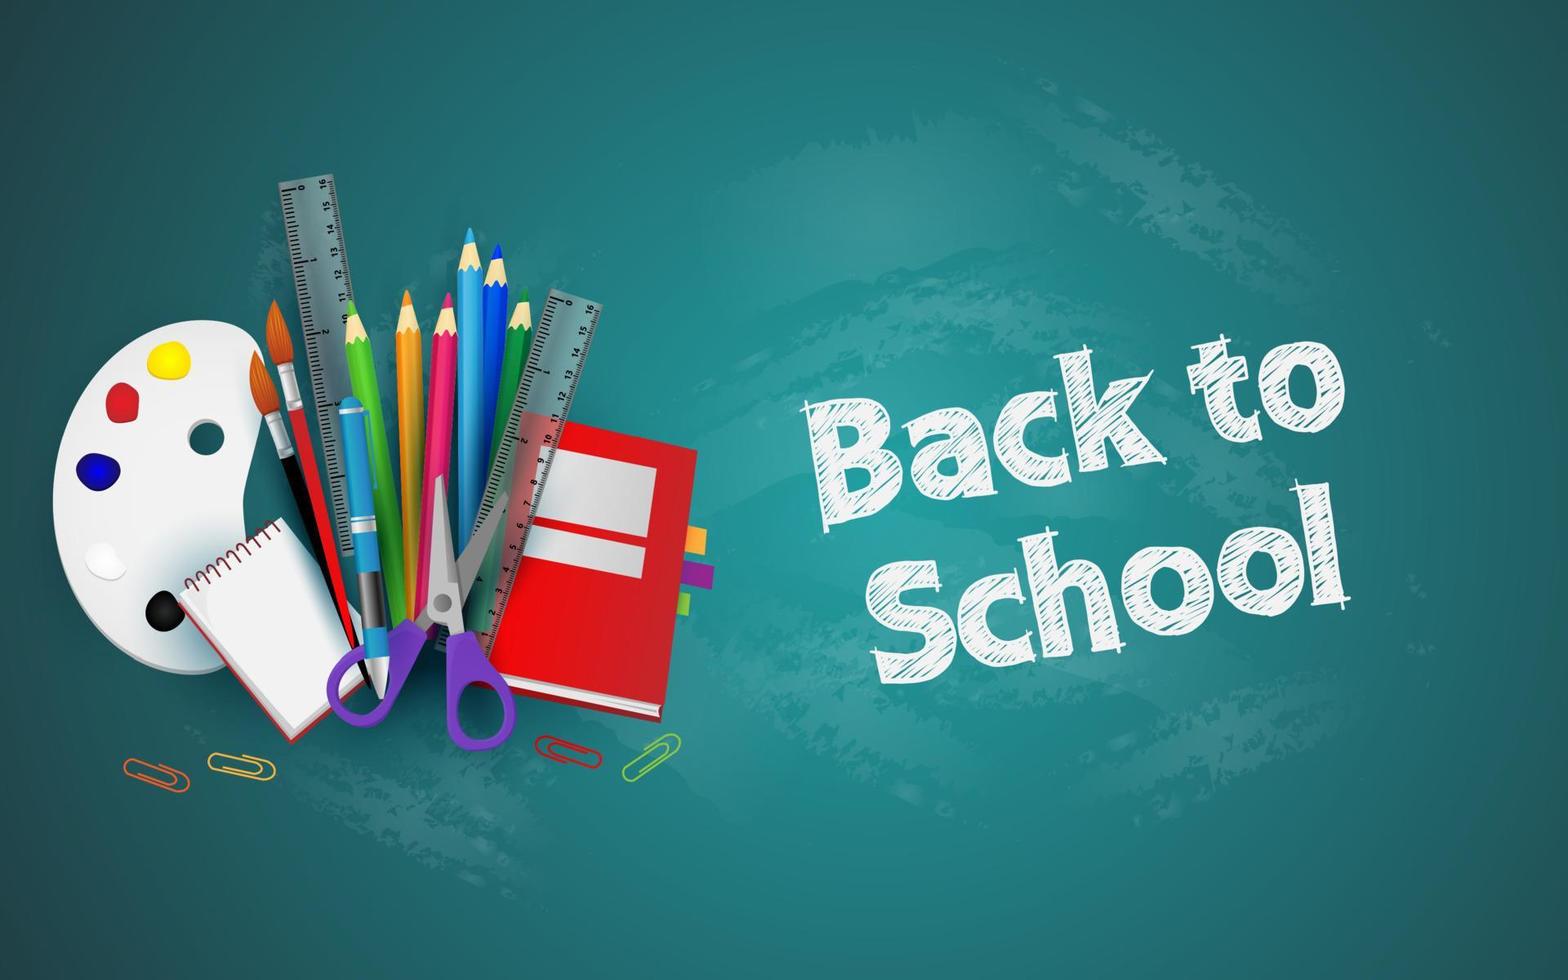 Back to school with school supplies and equipment vector